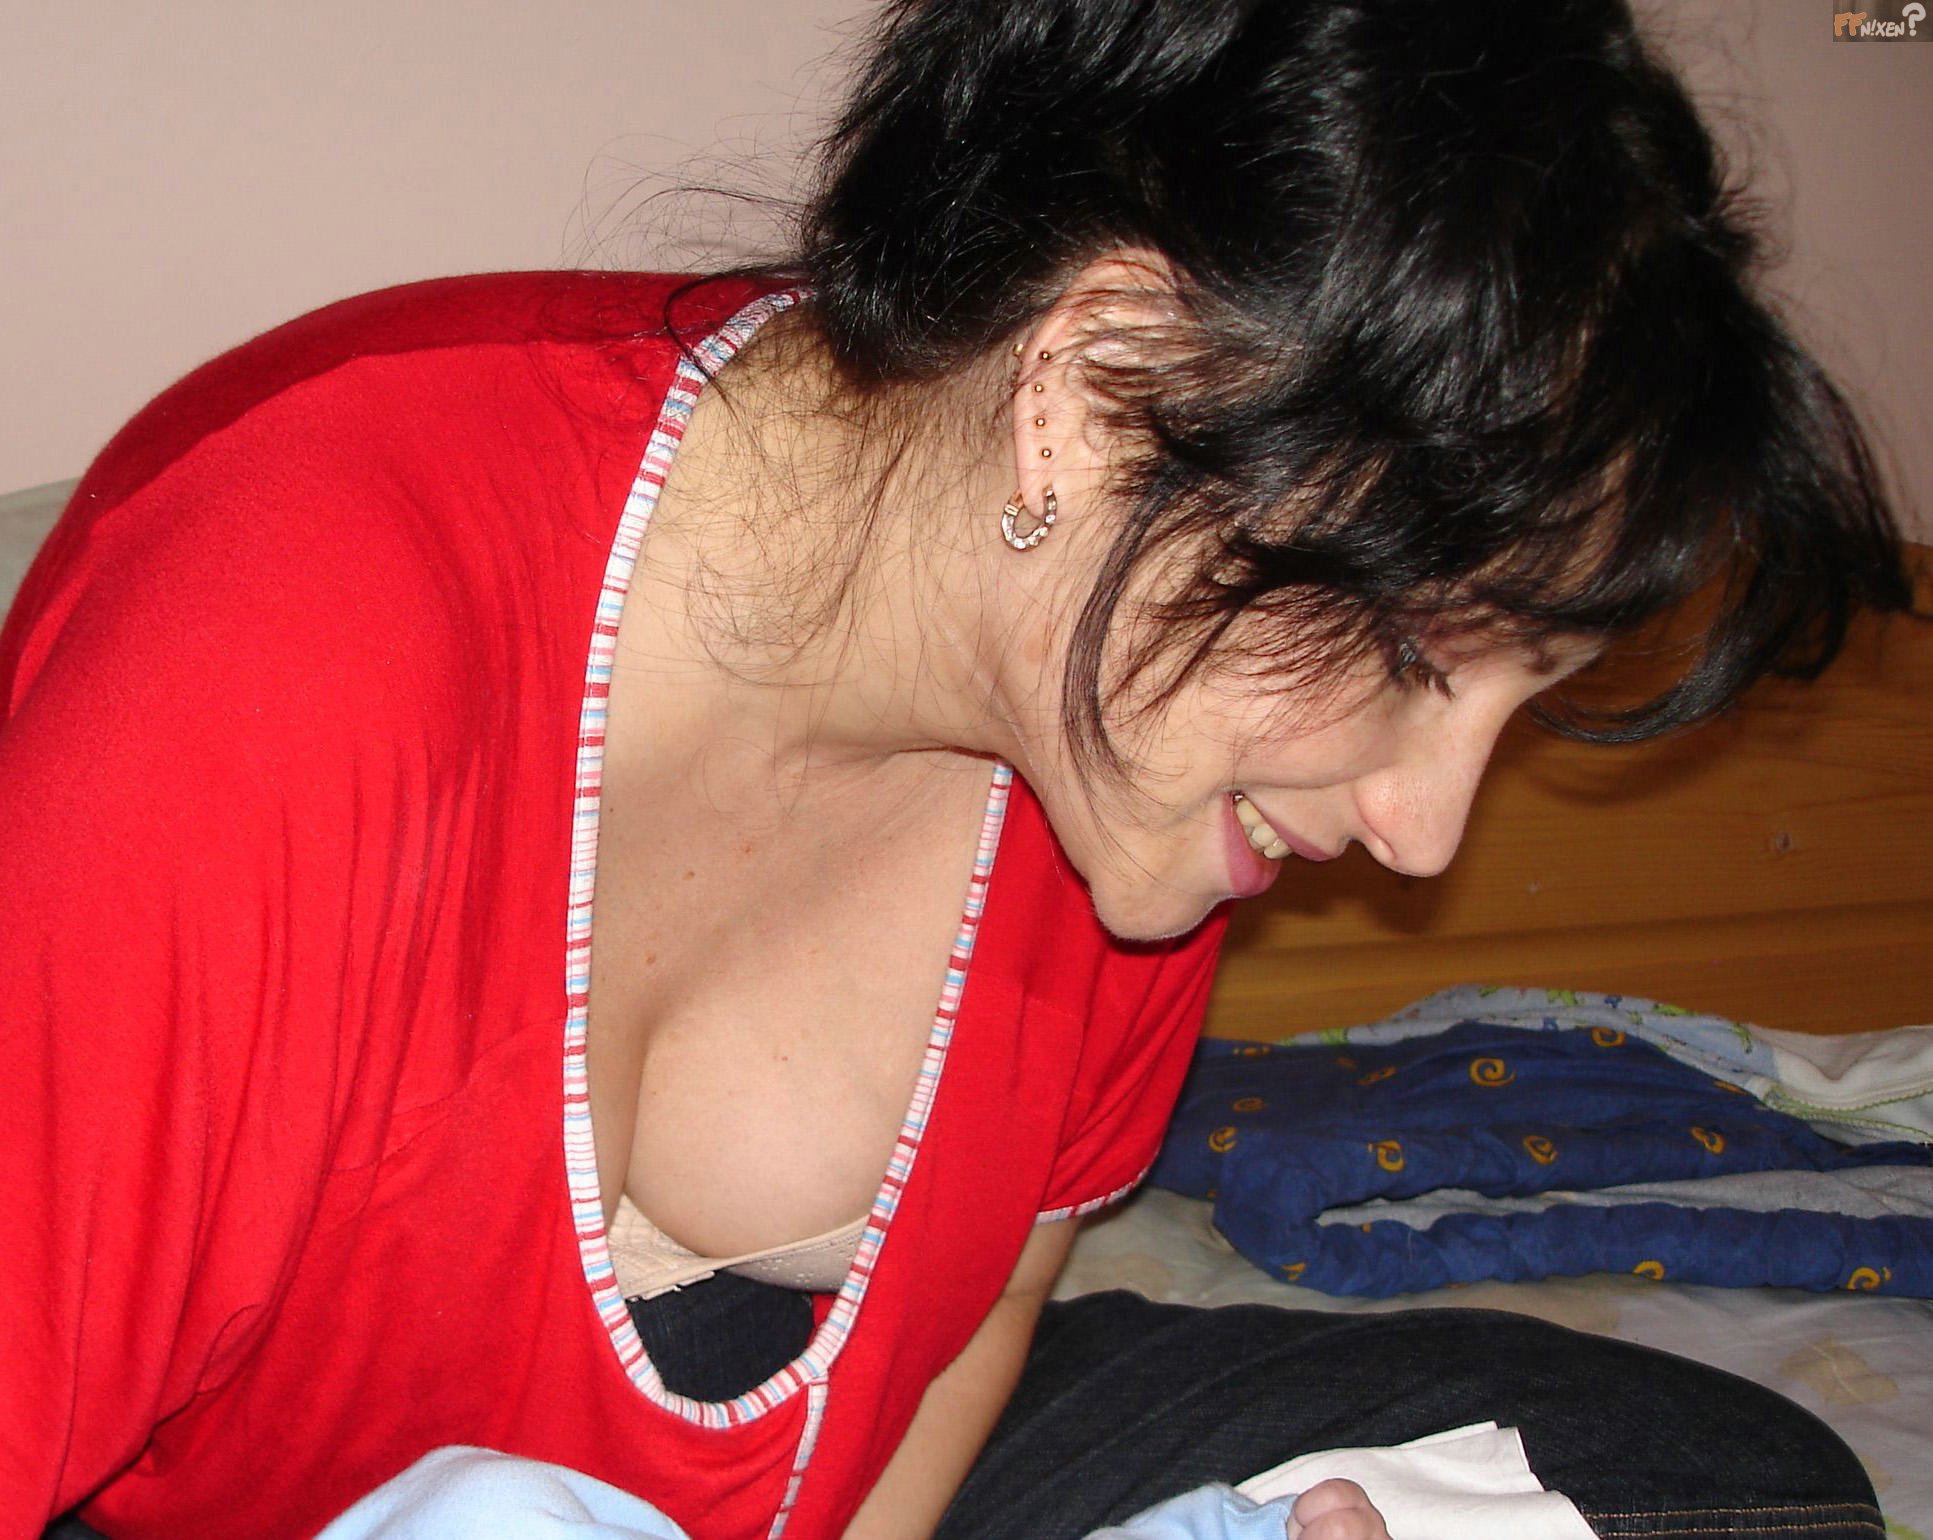 Woman bending over with blouse open showing cleavage